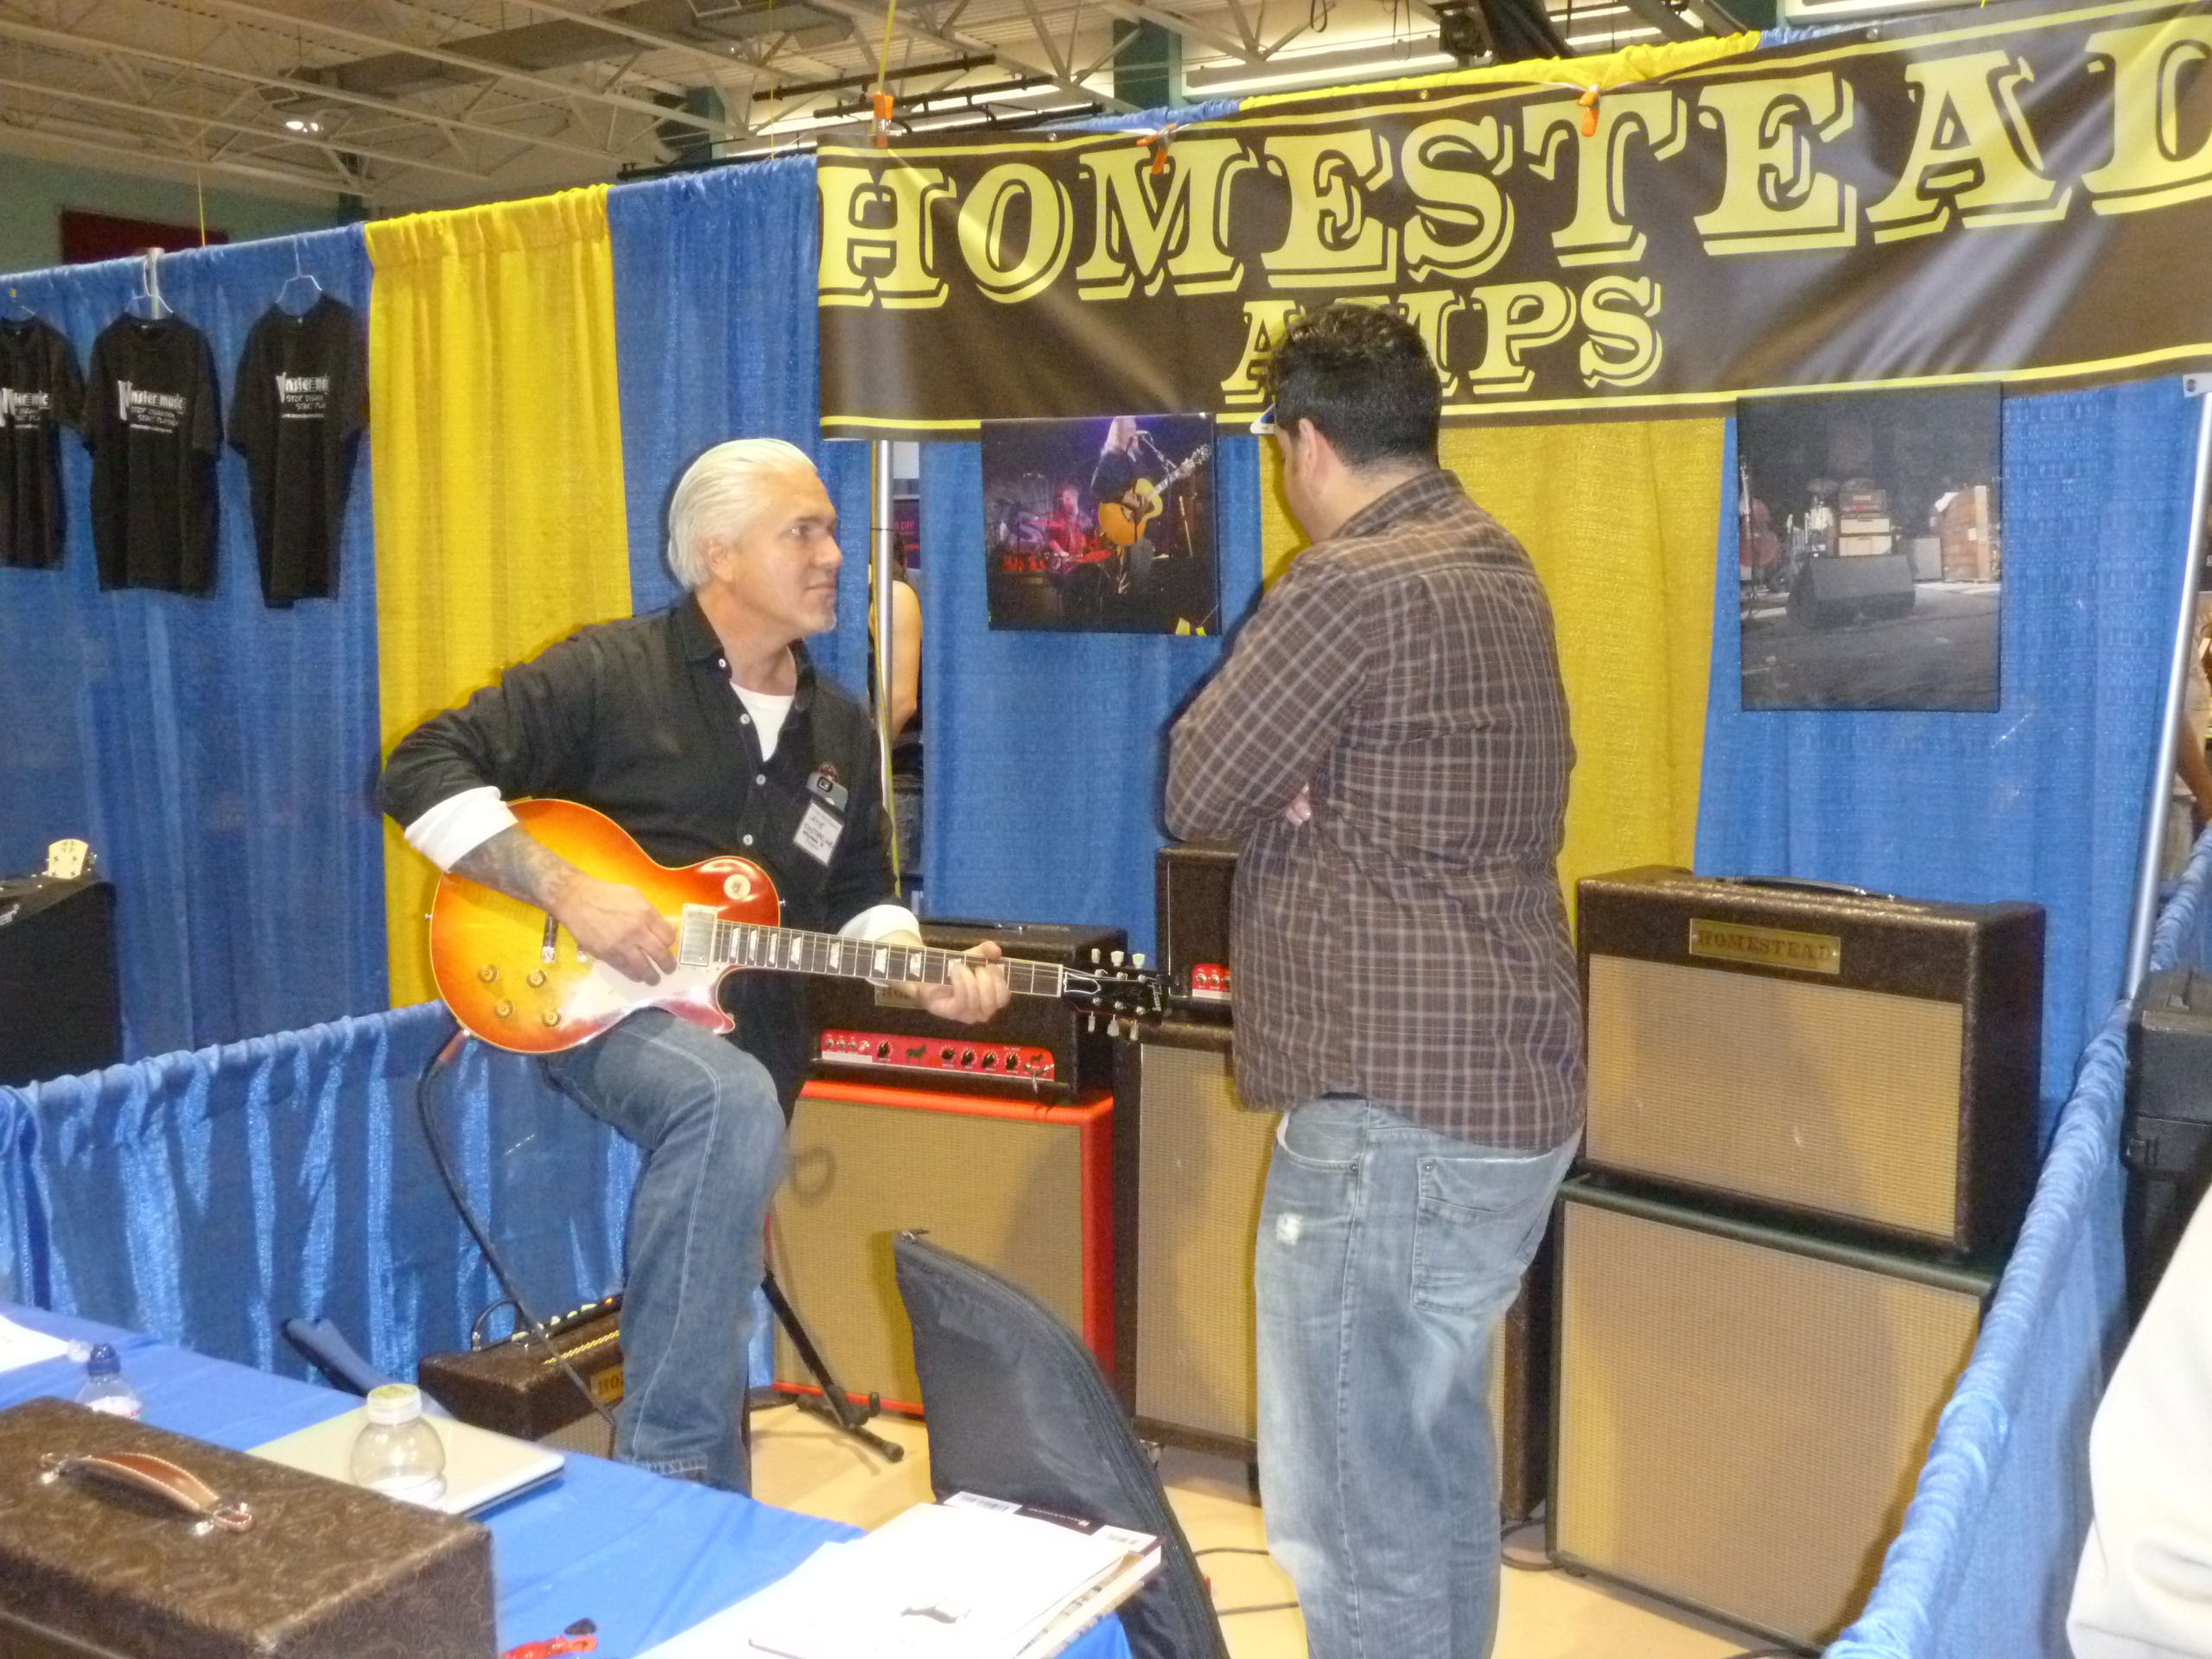 Getting a tone check at the Homestead Amps booth.